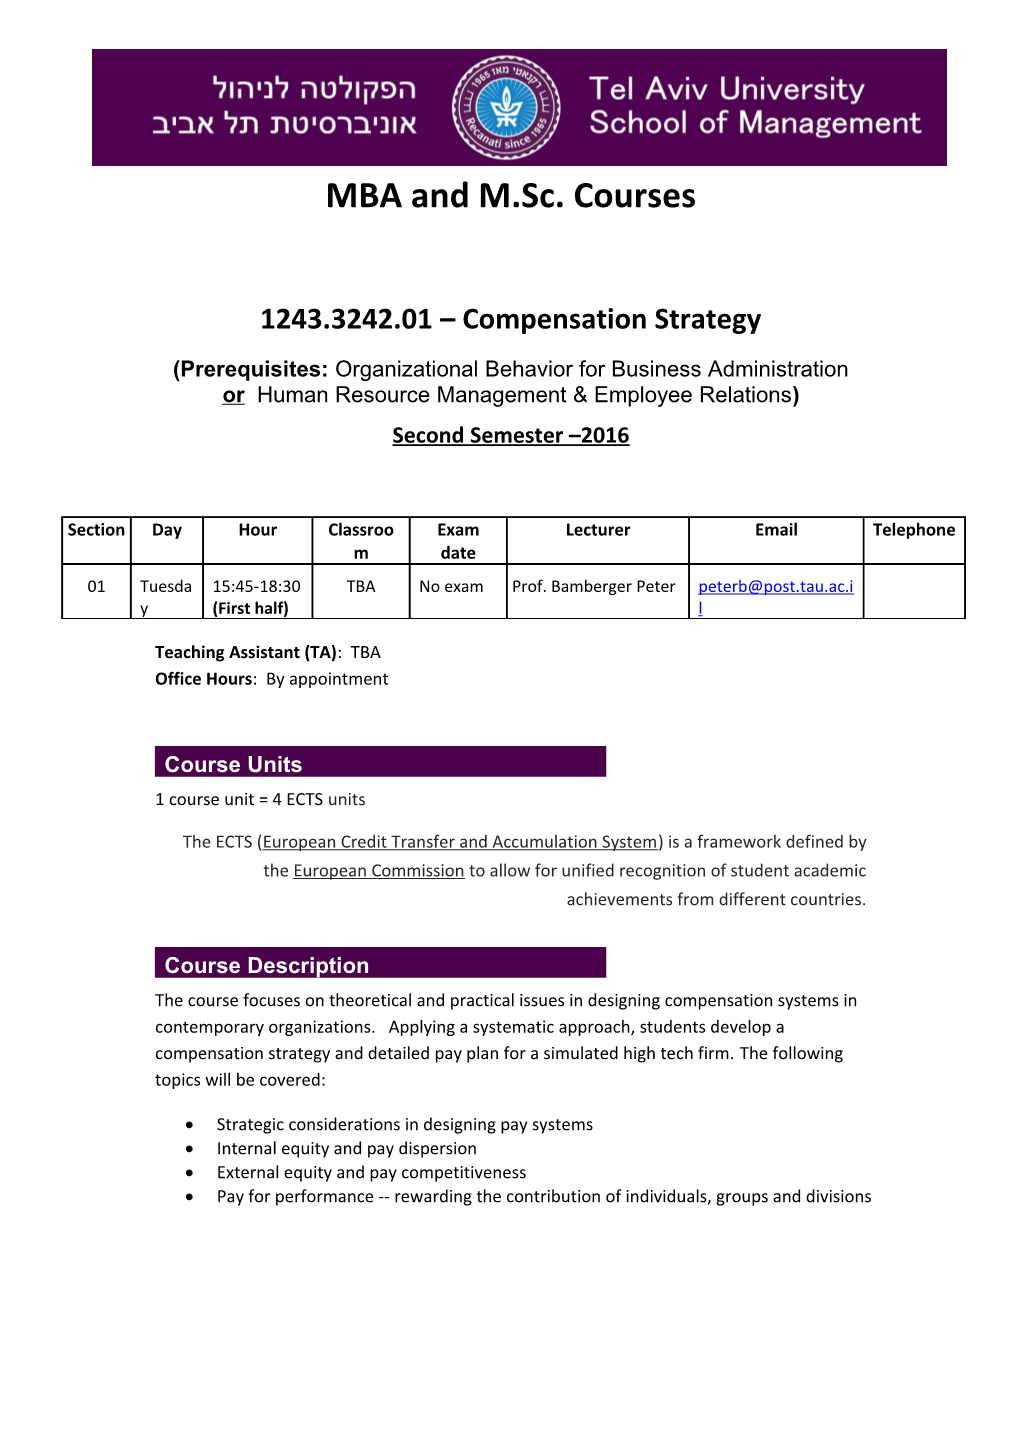 1243.3242.01 Compensation Strategy